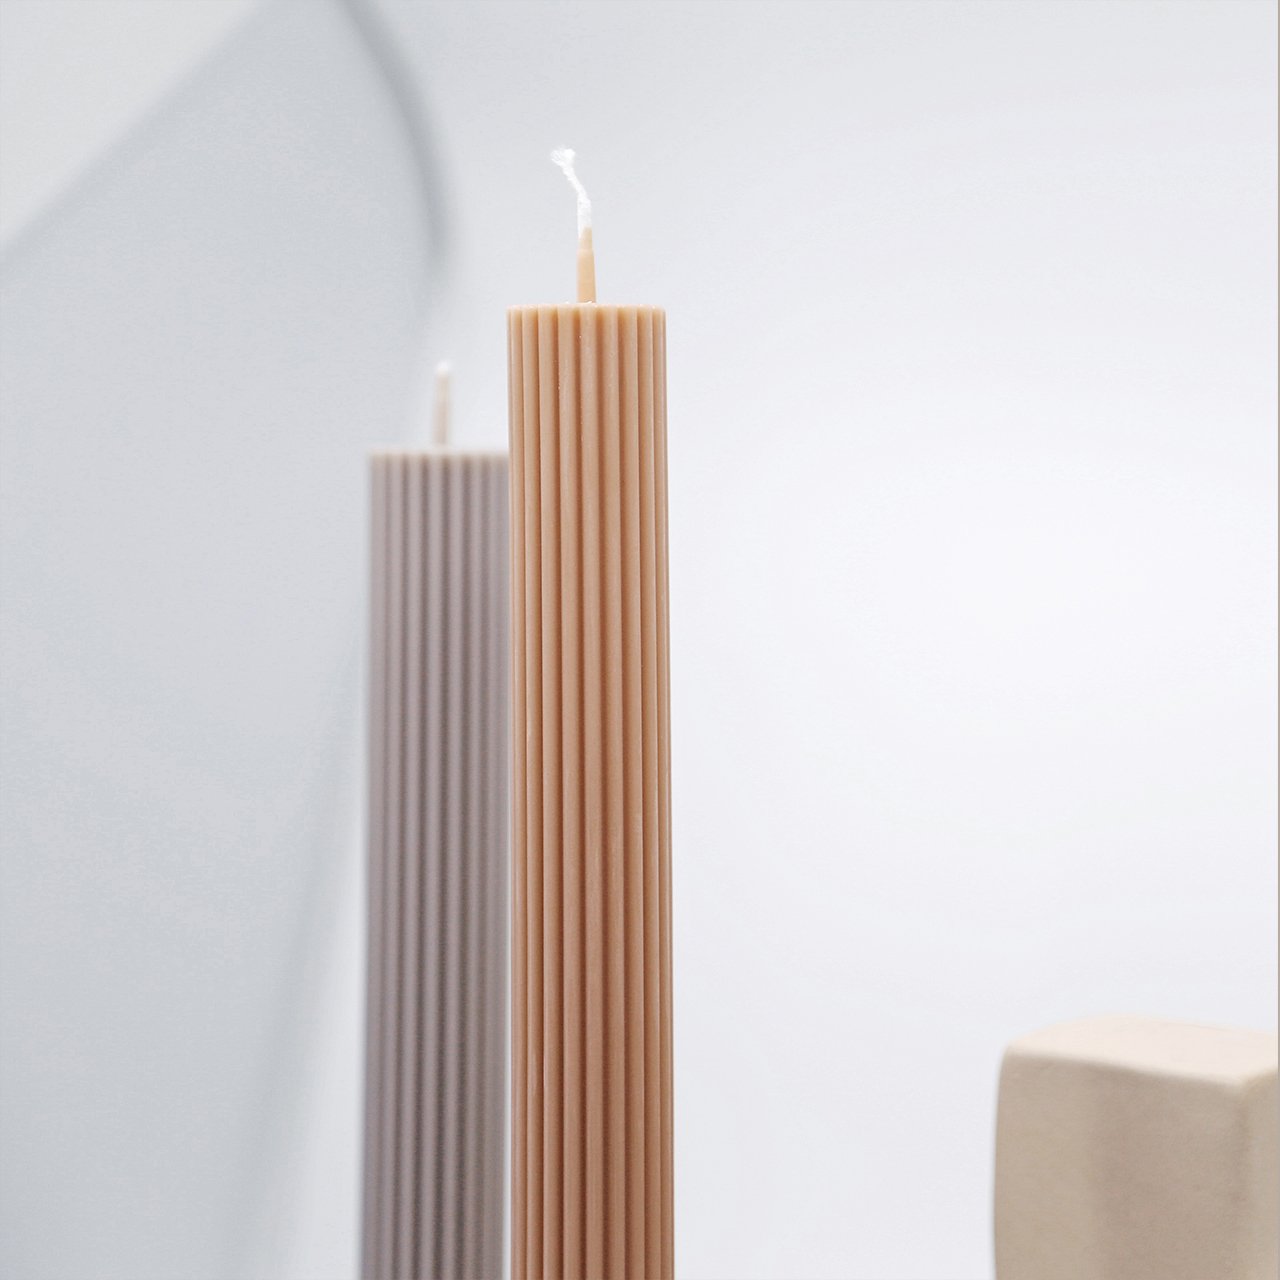 Our Column pillar candles are made from refined soy wax and good for home decoration. All candles in this collection are unscented. Please use a candle holder or candle plate underneath for the